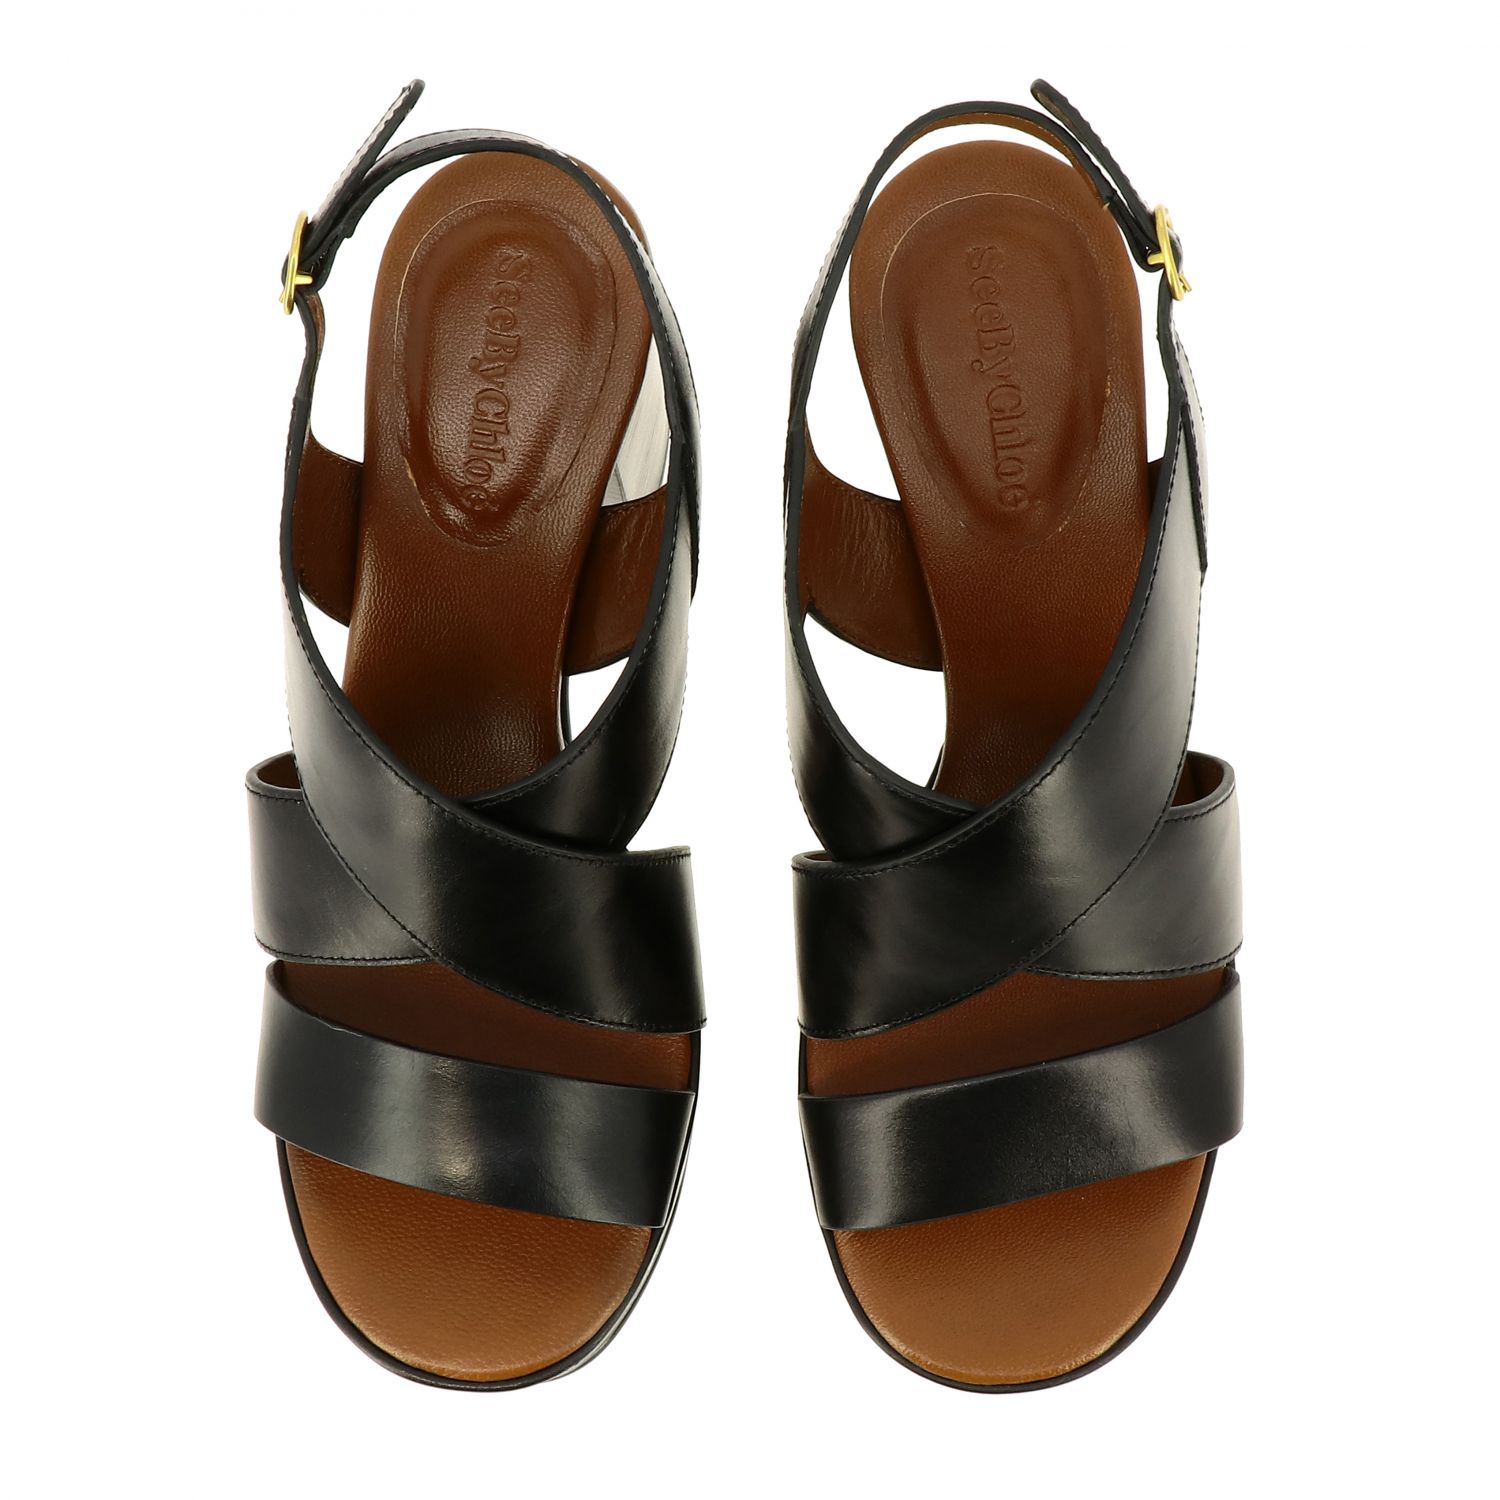 SEE BY CHLOÉ: heeled sandals for women - Black | See By Chloé heeled ...